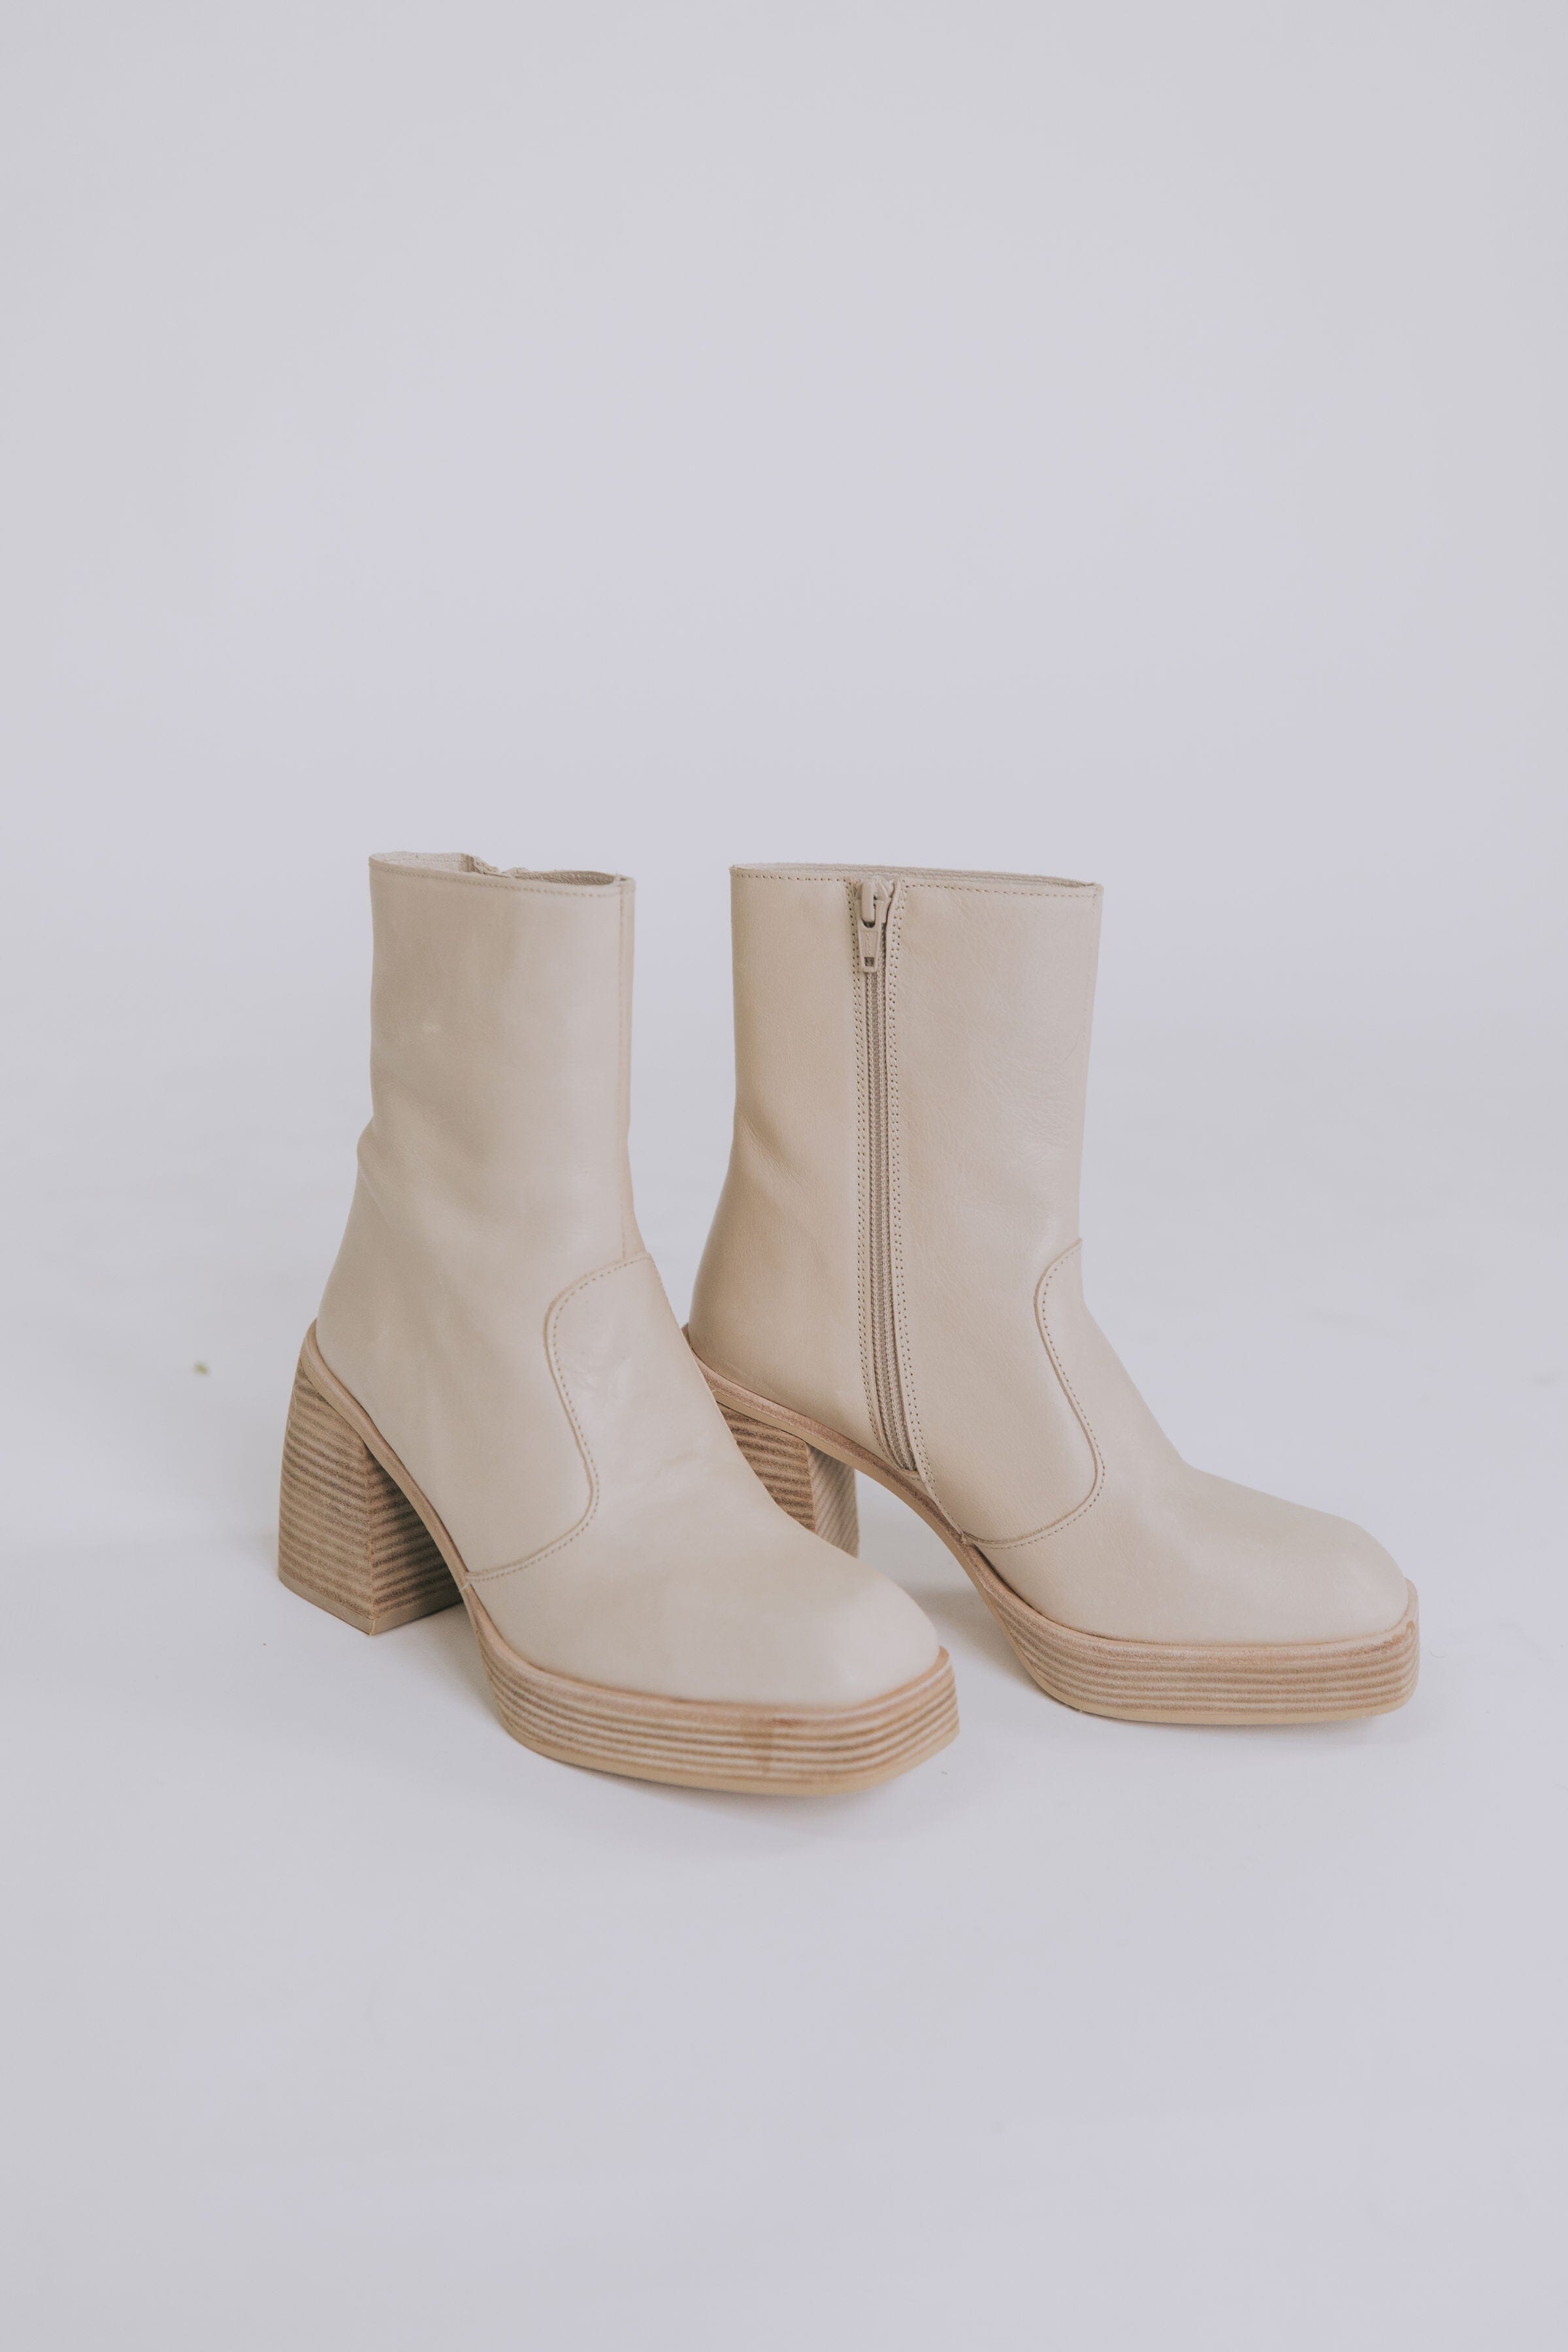 FREE PEOPLE - Ruby Platform Ankle Boots 